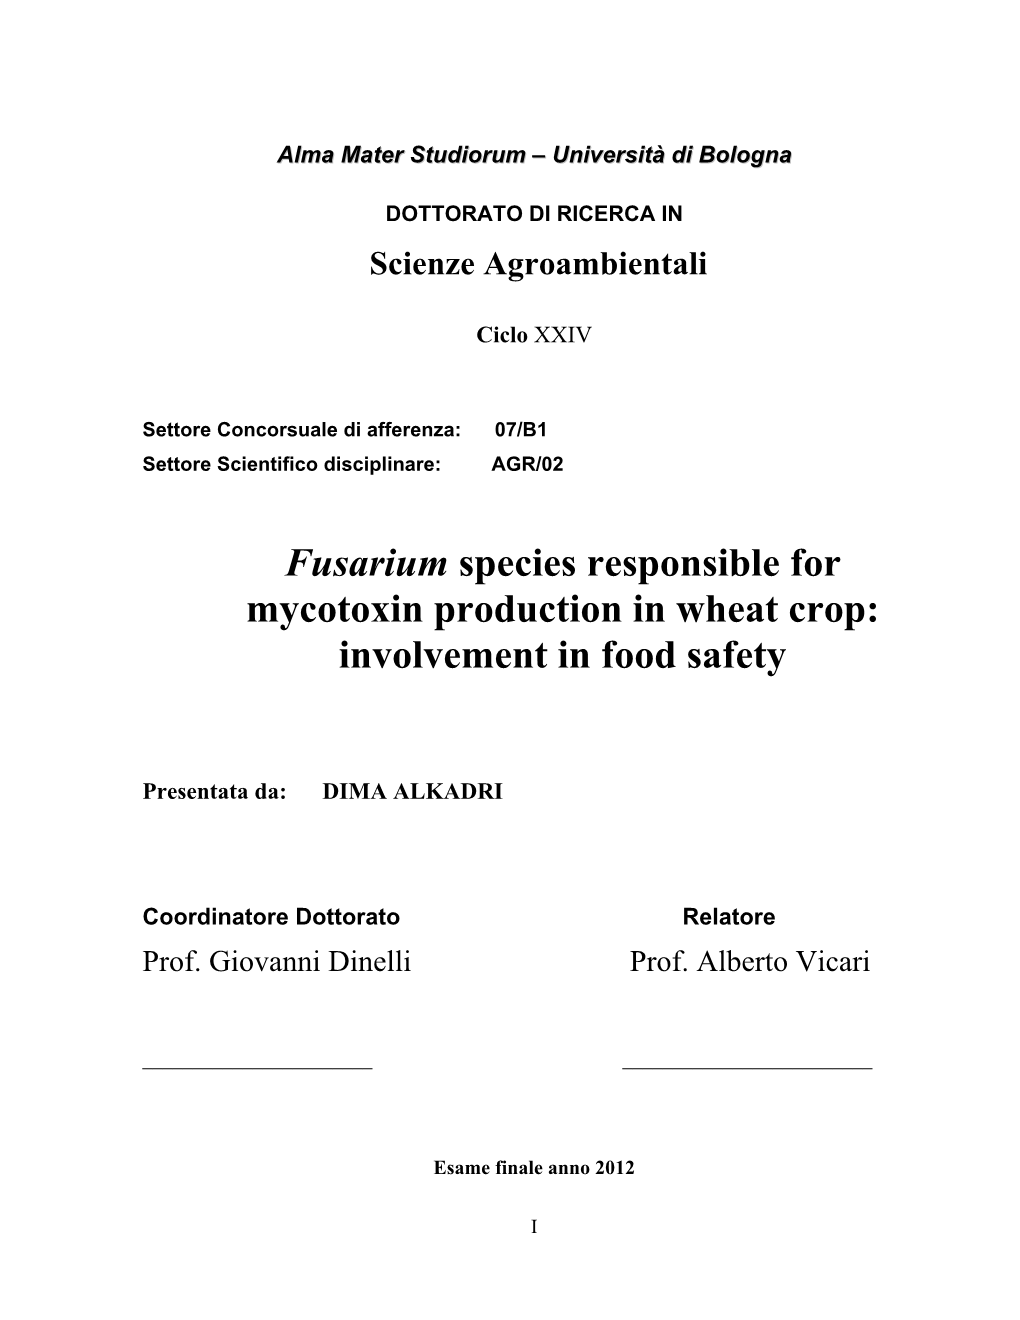 Fusarium Species Responsible for Mycotoxin Production in Wheat Crop: Involvement in Food Safety